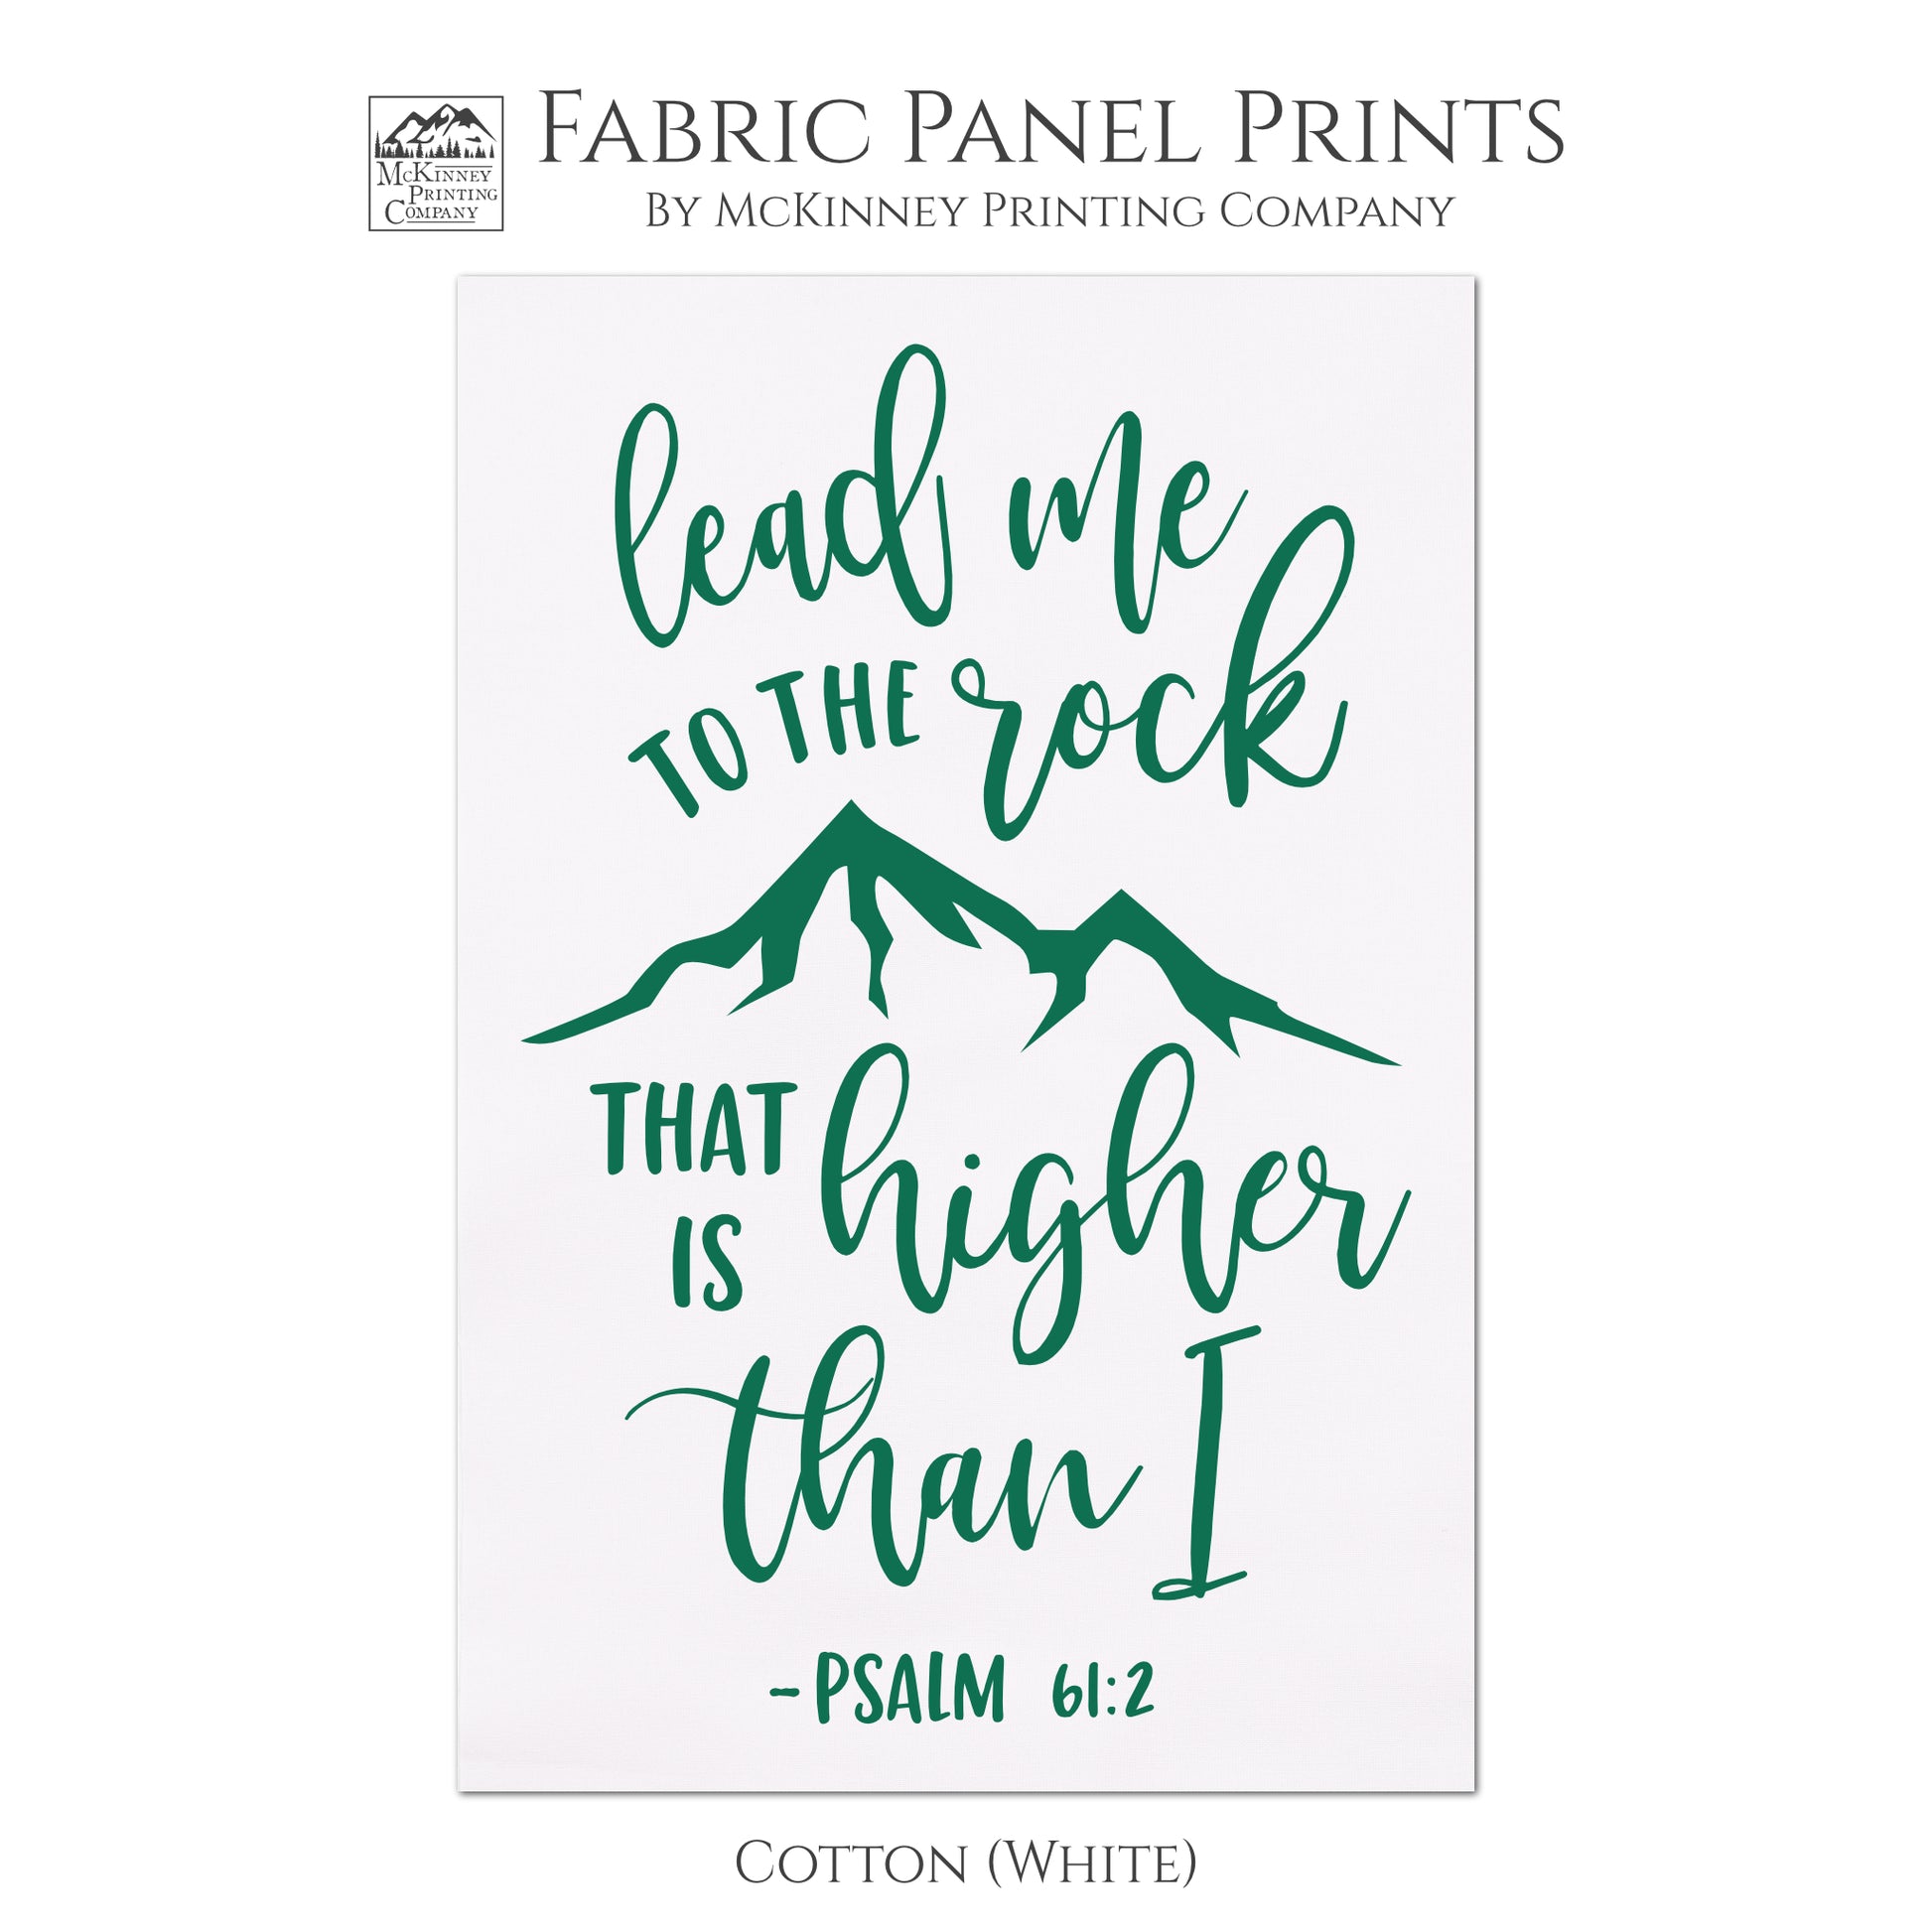 Lead me to the rock that is higher than I - Psalm 61 2, Scripture Fabric, Bible Verse Wall Art, Fabric Panel Print, Large Print Quilt Block - Cotton, White